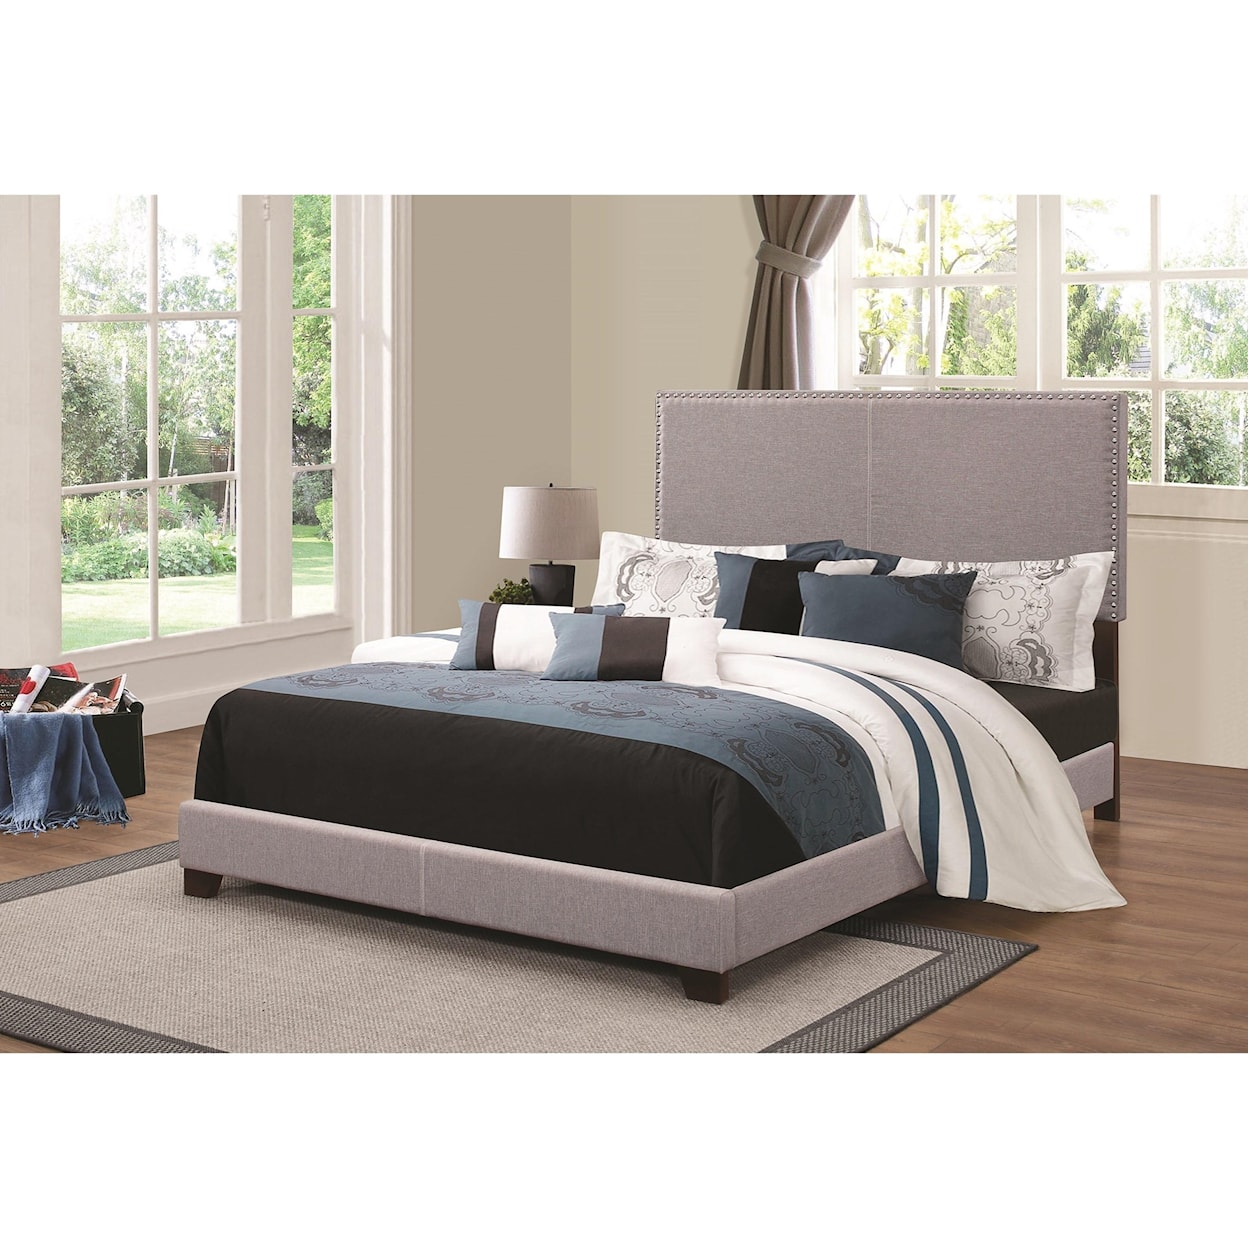 Coaster Upholstered Beds Cal King Bed